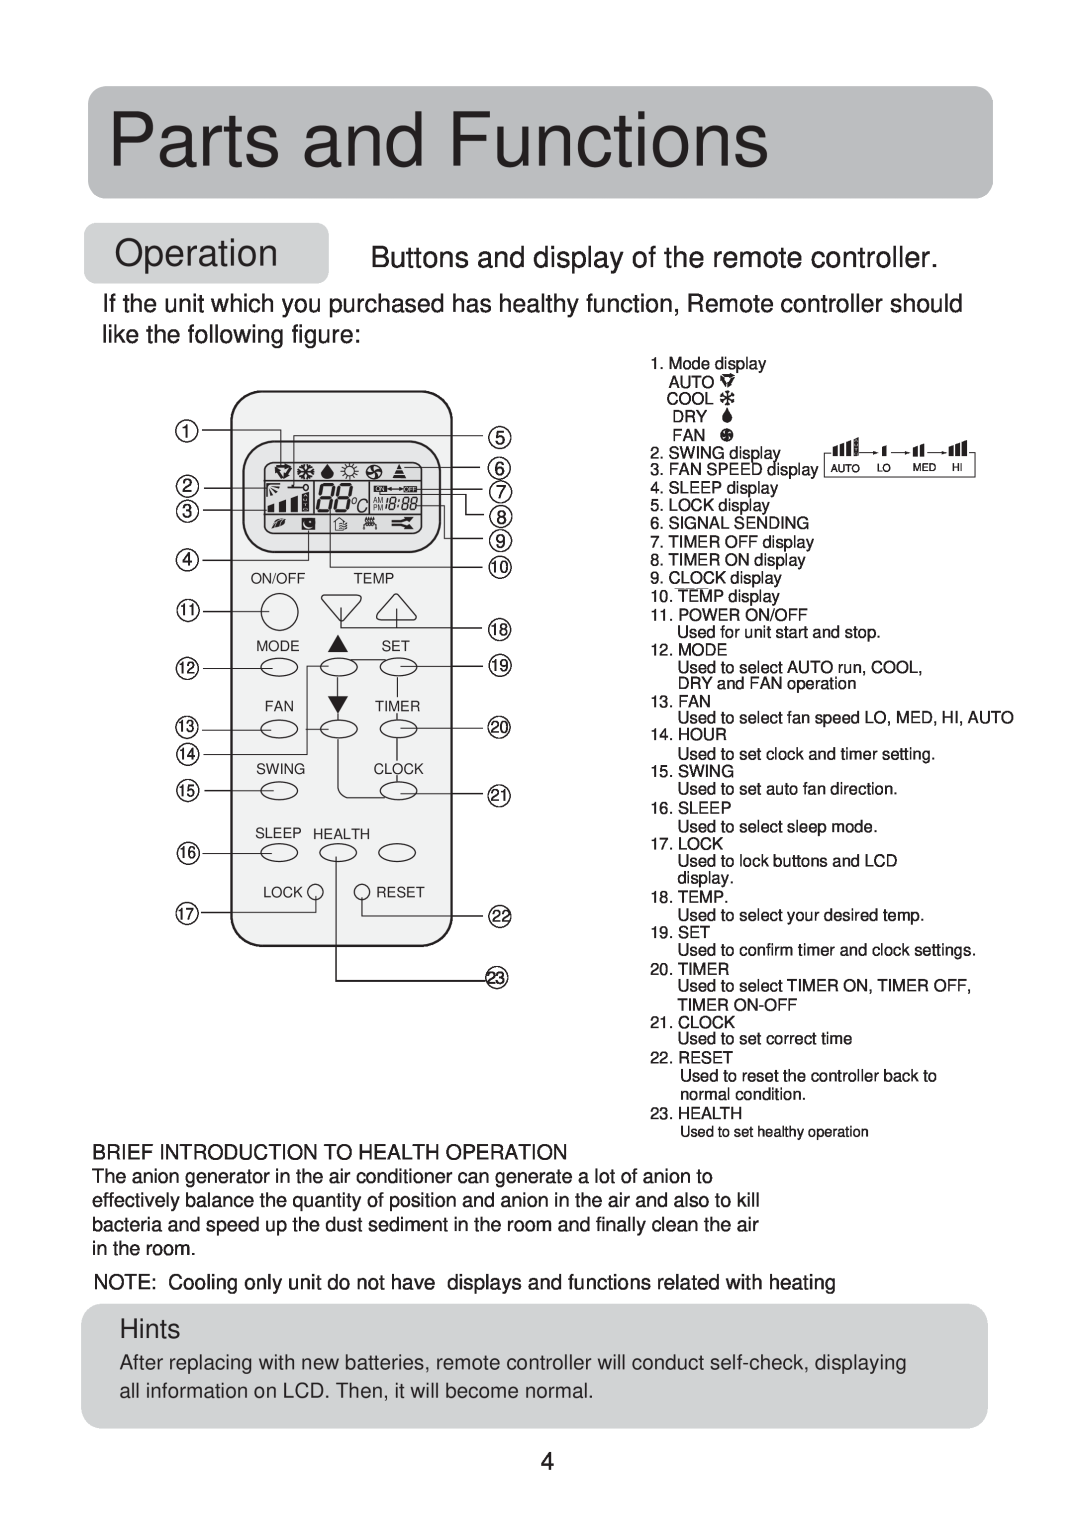 Haier HSU-18LE03, HSU-09LE03, HSU-12LE03, HSU-22LE03 operation manual Parts and Functions, Hints, like the following figure 